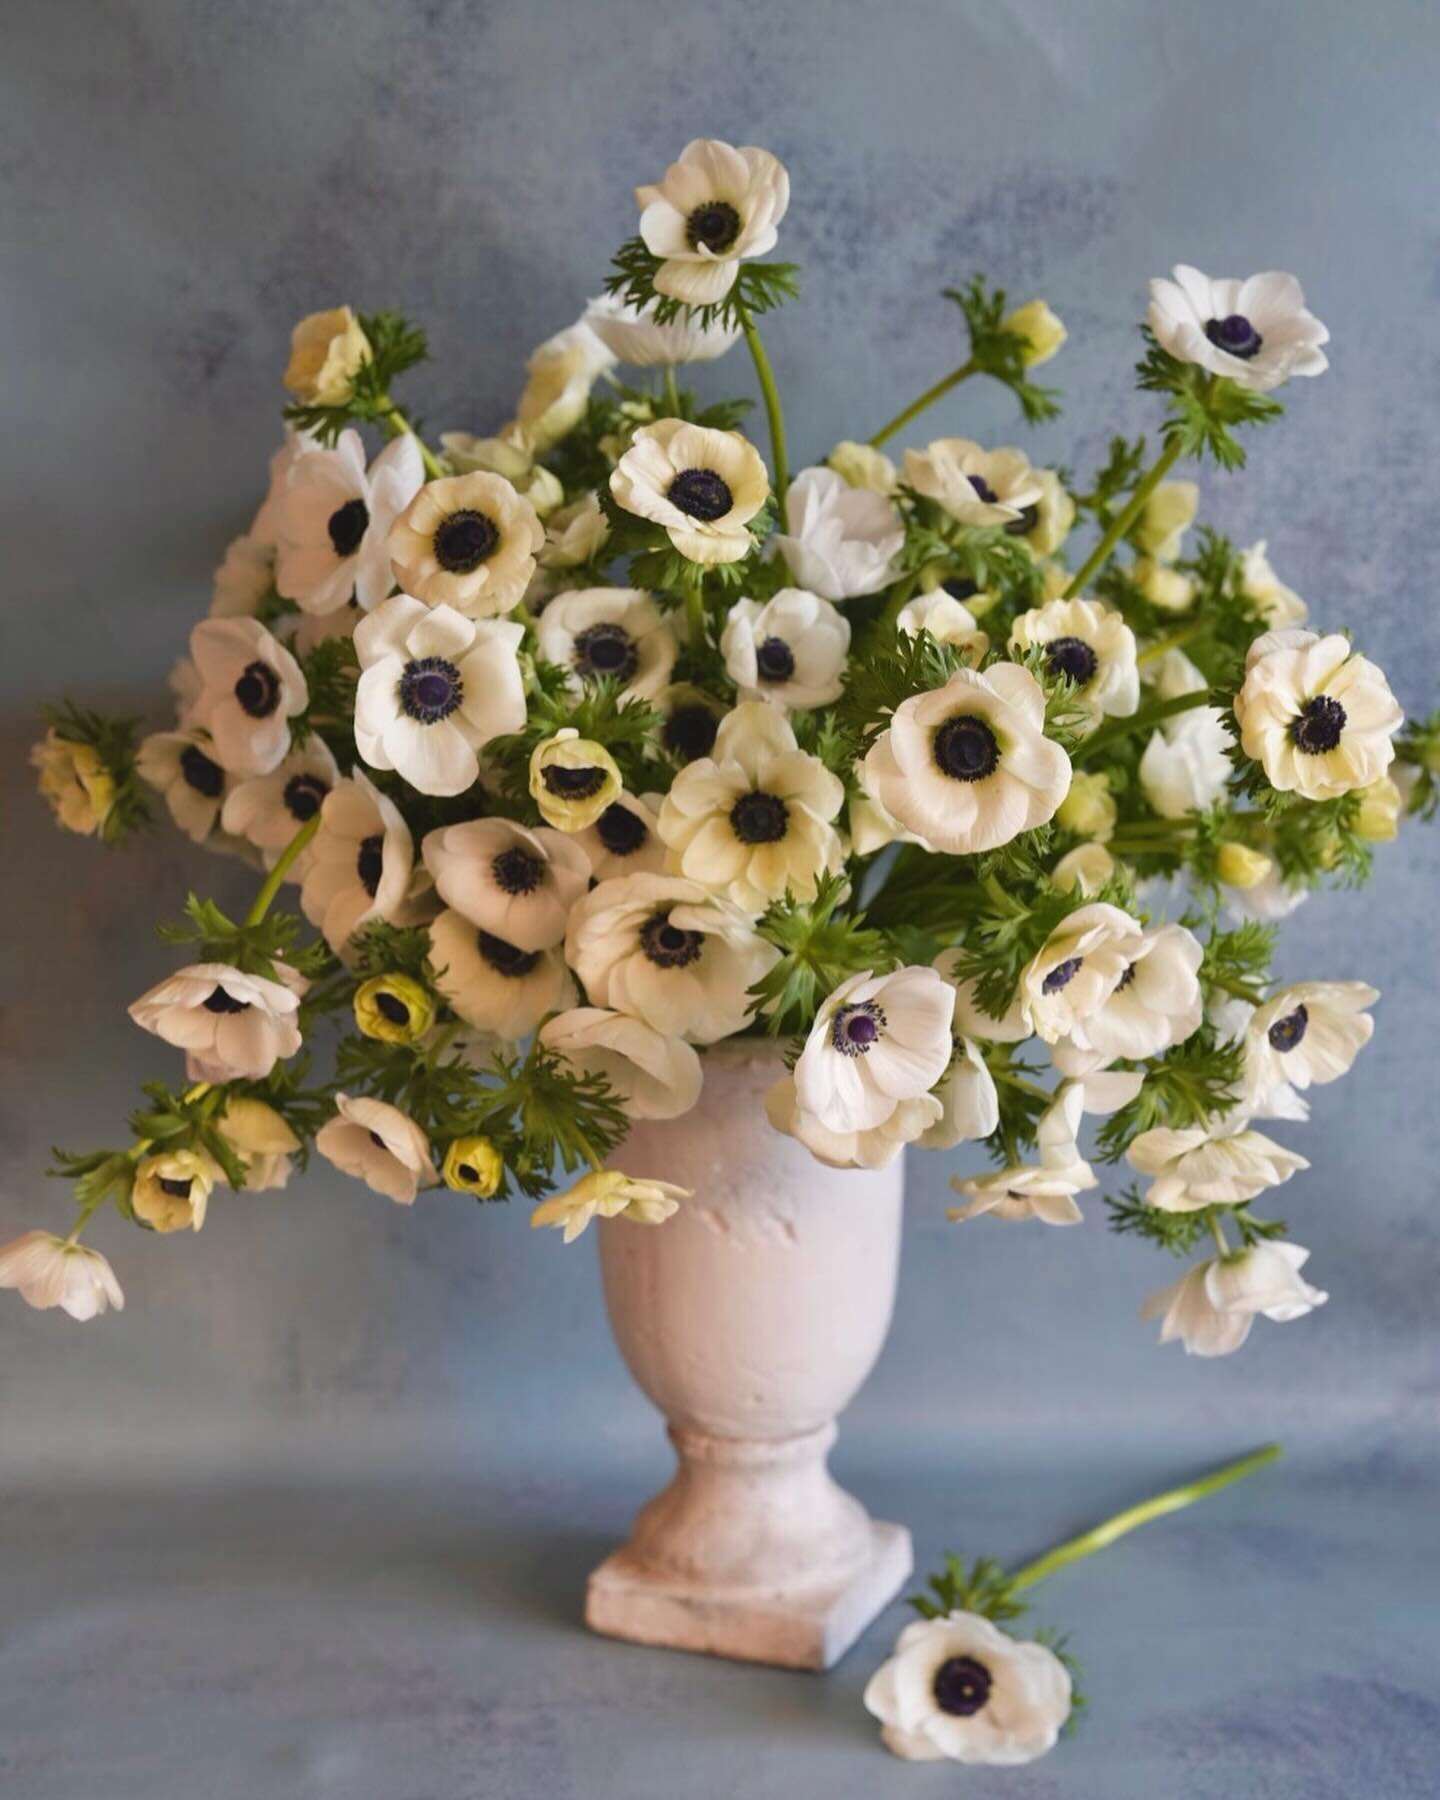 It&rsquo;s a really good year for anemones 🖤🤍🖤 
The Farmstand will be open this Saturday (April 6th) from 9am-6pm. It will be LOADED with fresh flowers like these anemone, ranunculus, fritillaria, tulips &amp; more. We&rsquo;ll also have a selecti